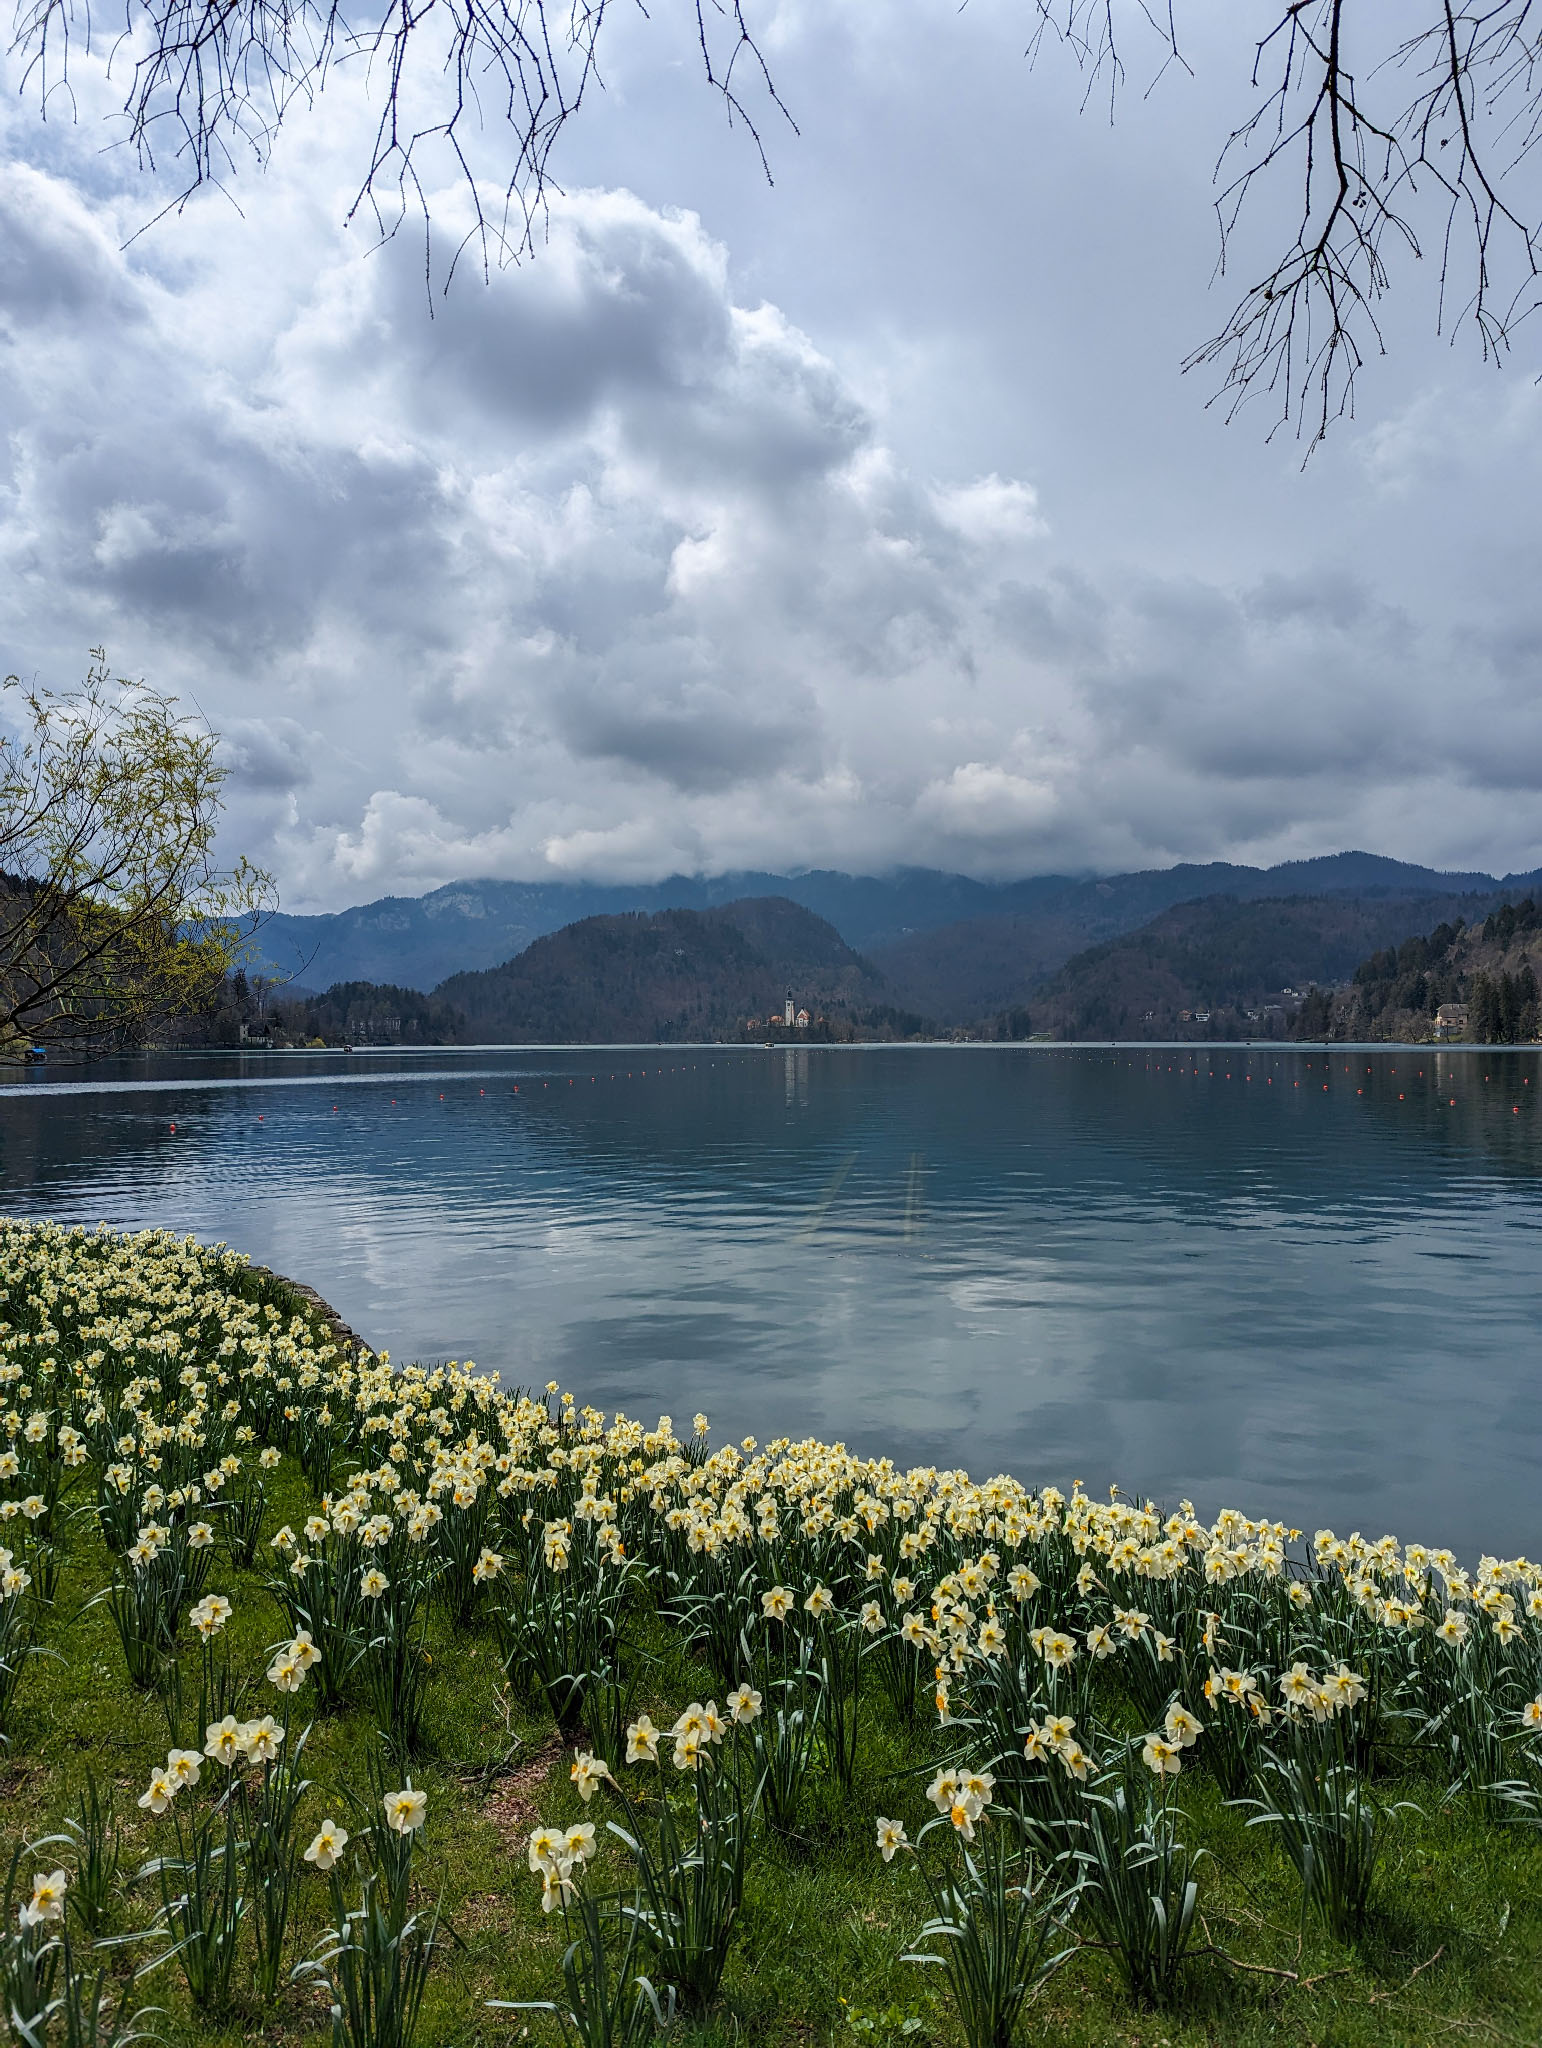 Daffodils on grass in the foreground; a large, flat lake beyond with a small island housing a church. Mountainous landscape in the background is partly hidden by big grey clouds.